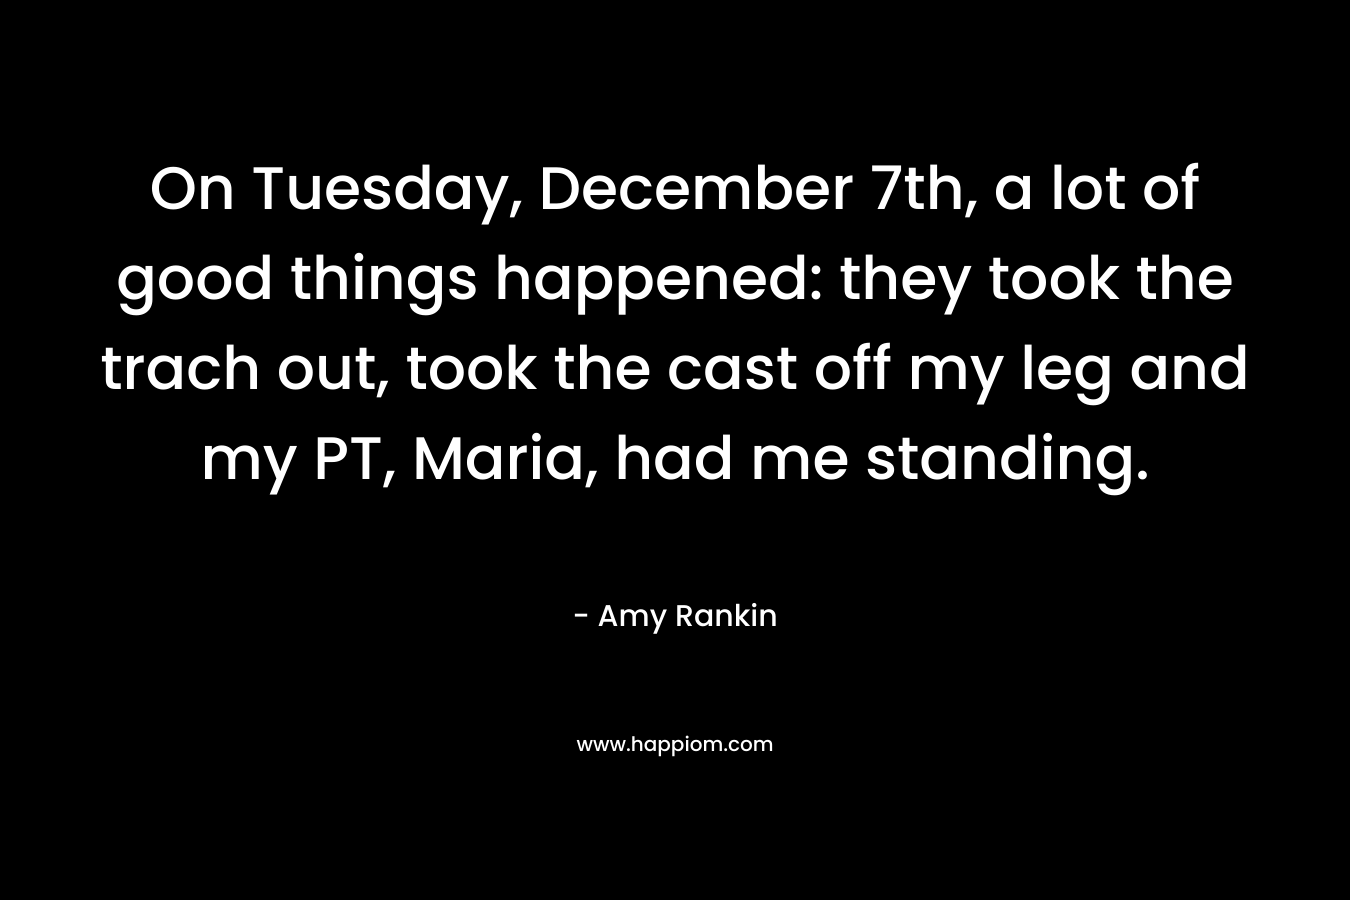 On Tuesday, December 7th, a lot of good things happened: they took the trach out, took the cast off my leg and my PT, Maria, had me standing. – Amy Rankin